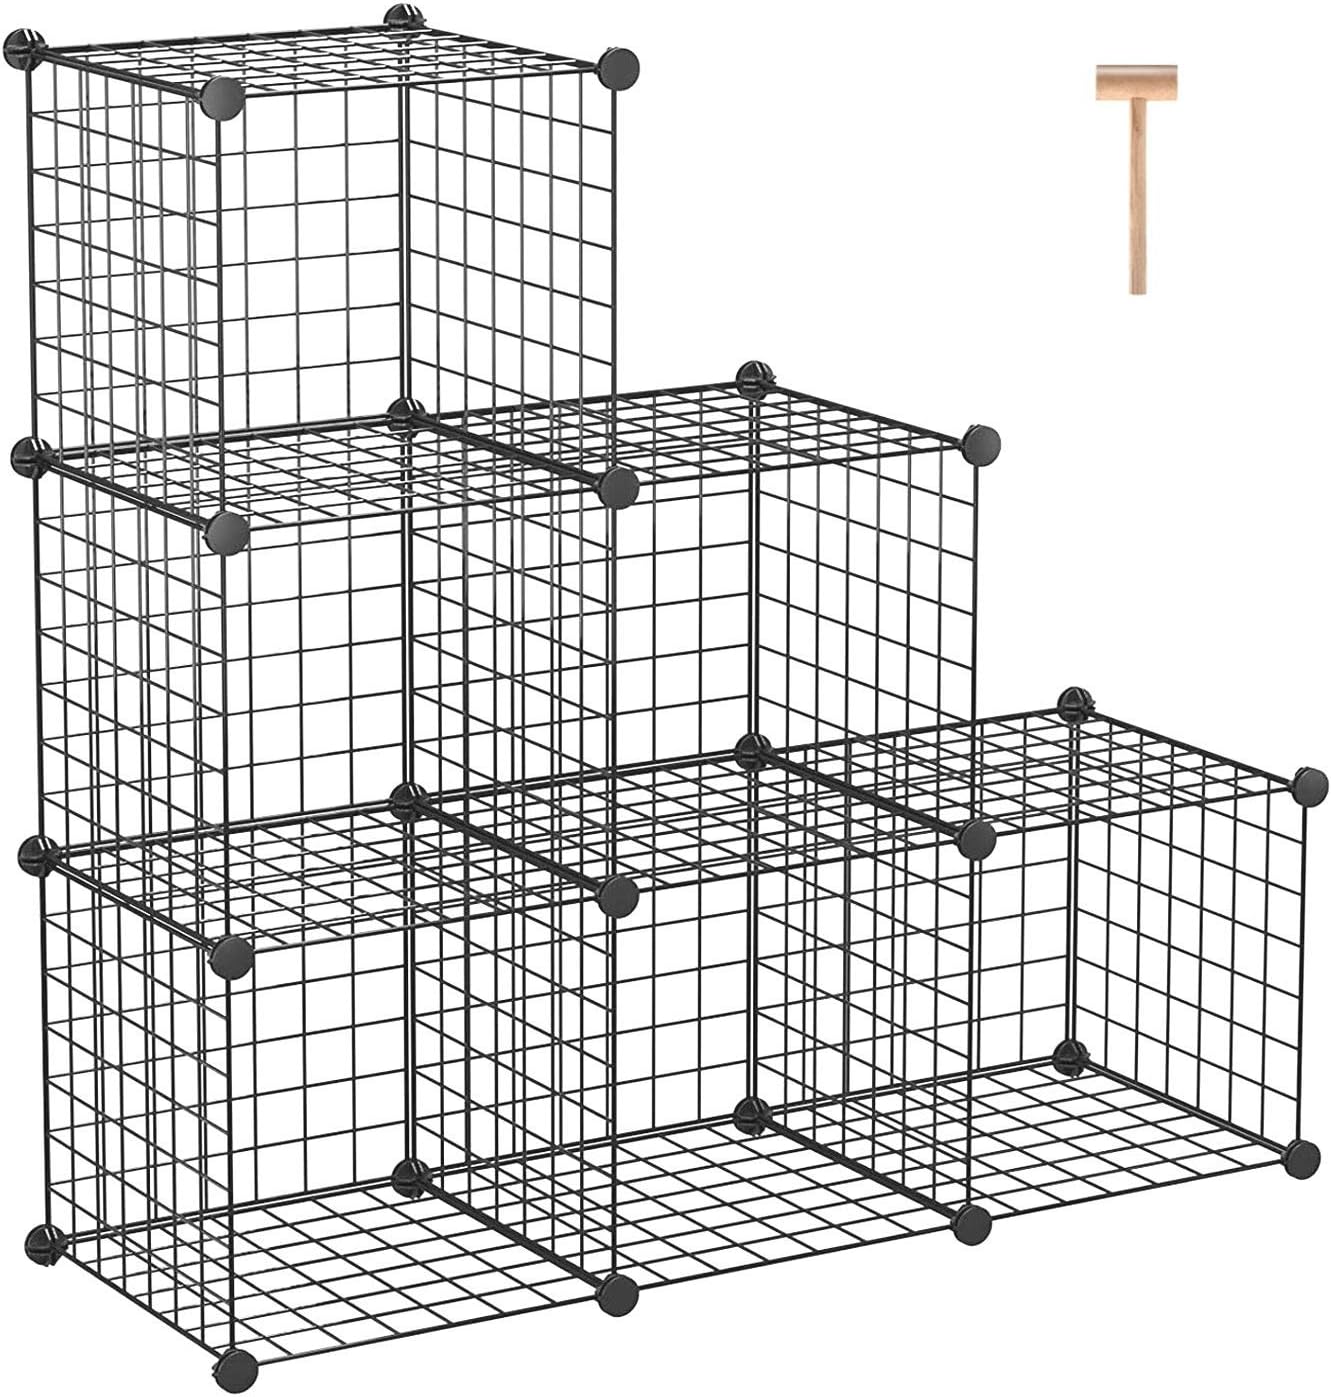 C Ahome Wire Storage Cubes Metal Grids, Modular Shelving Cubes